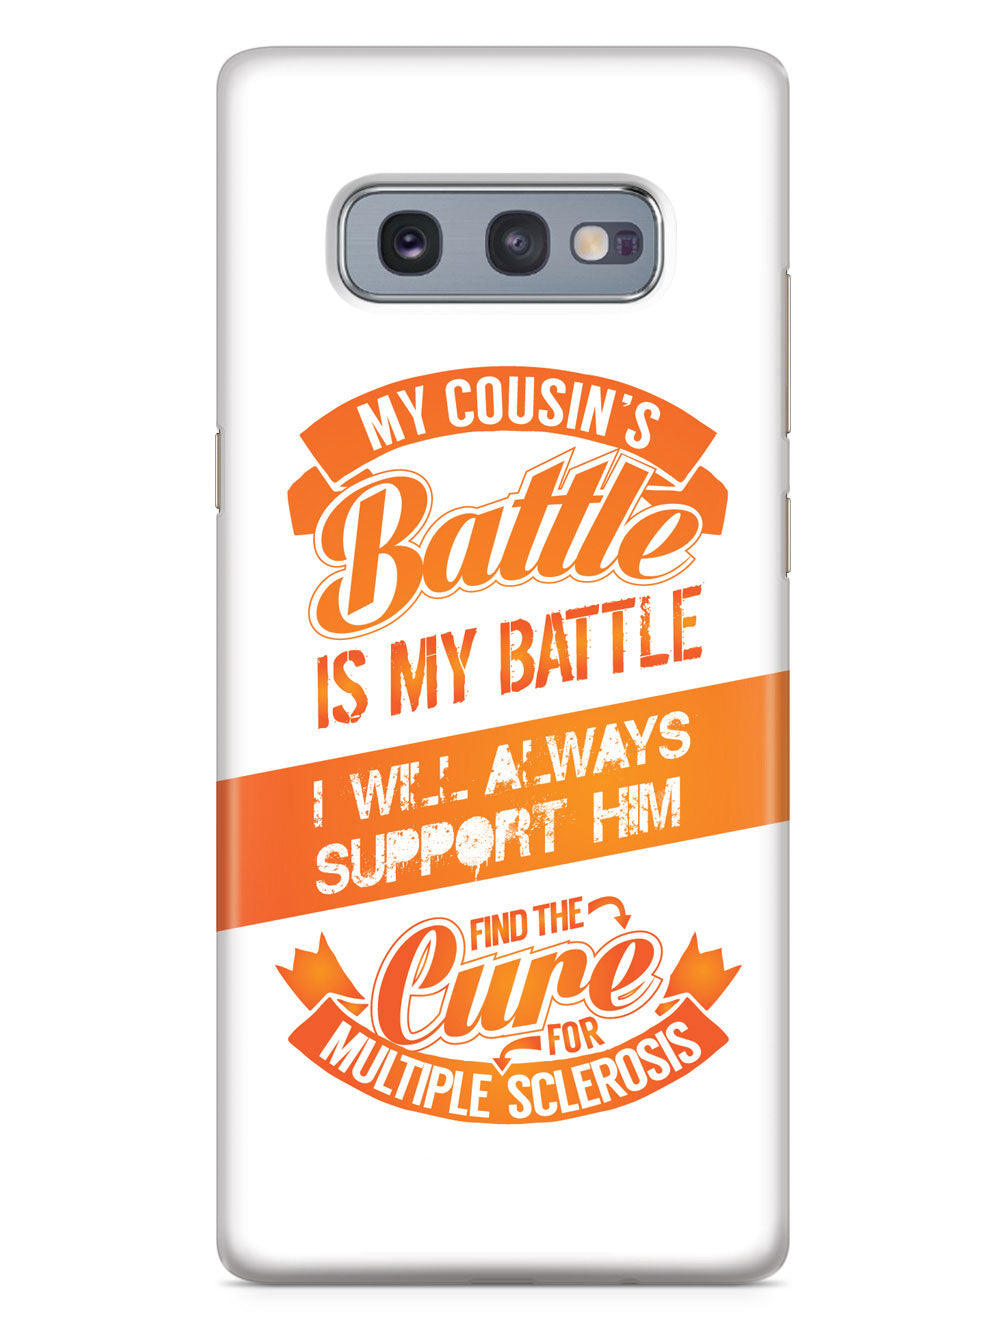 My Cousin's (HIS) Battle - Multiple Sclerosis Awareness Case